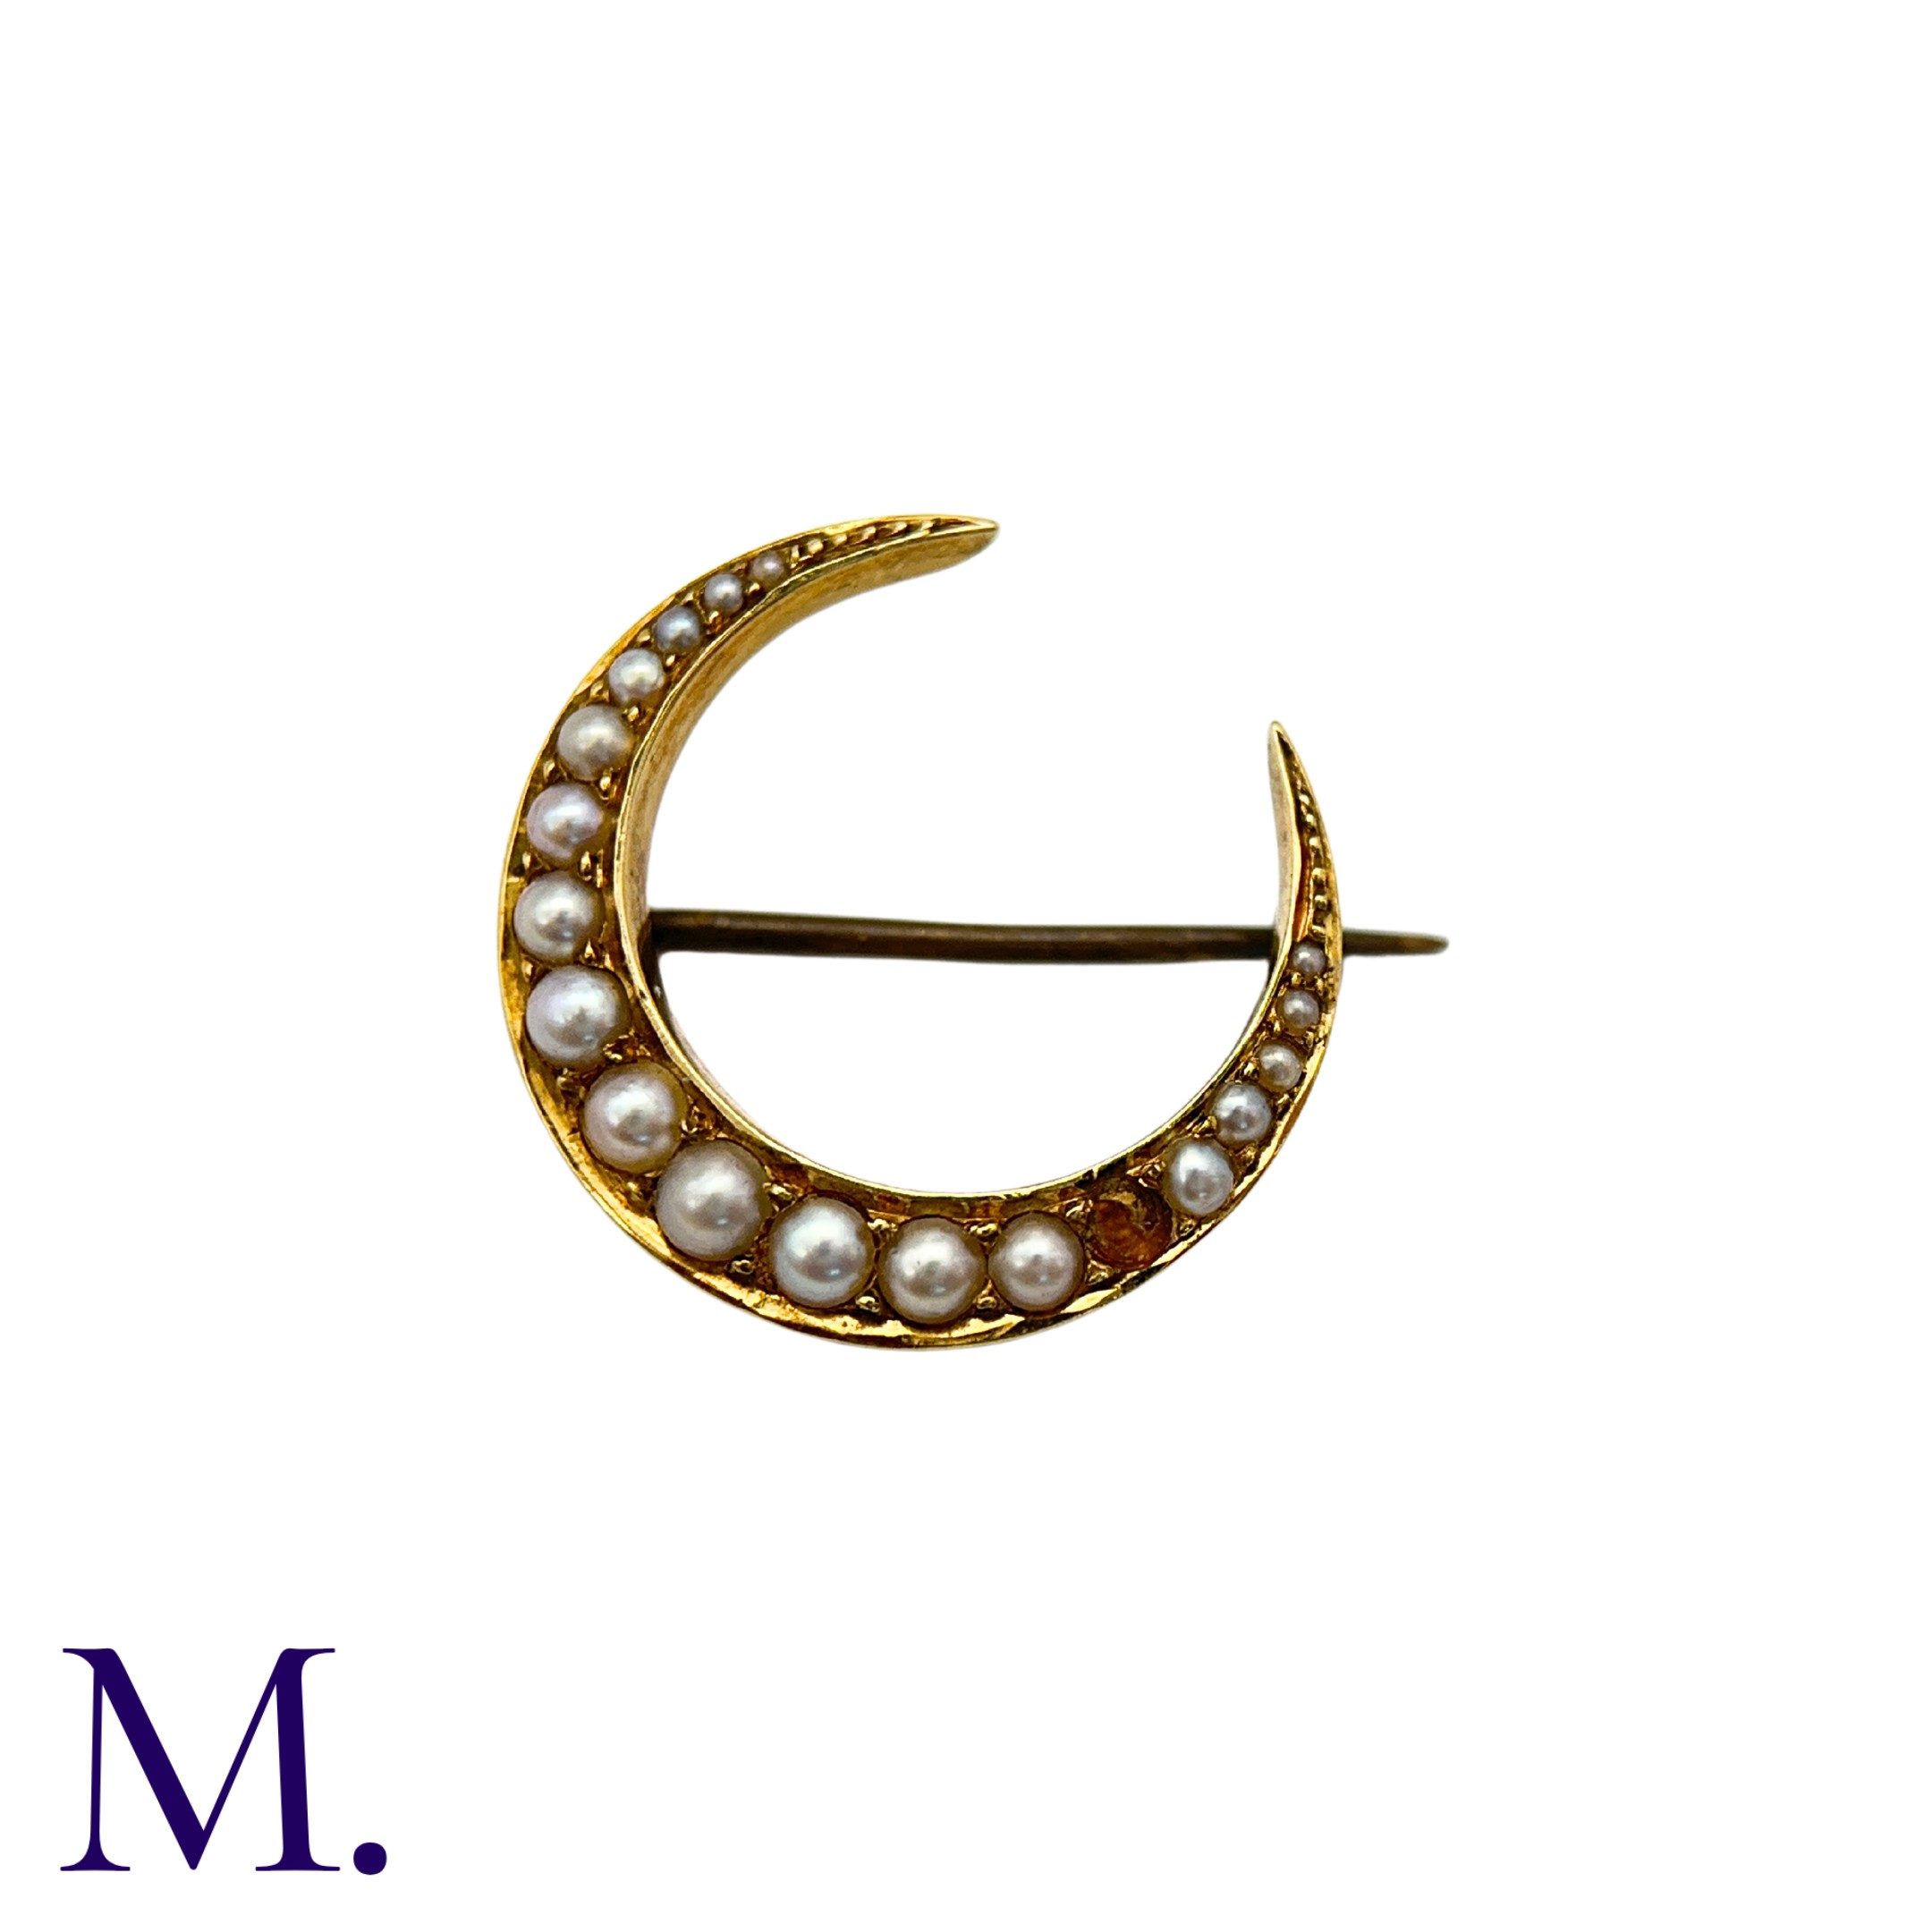 A Pearl Crescent Brooch in yellow gold, of crescent form set with a row of graduated pearls.